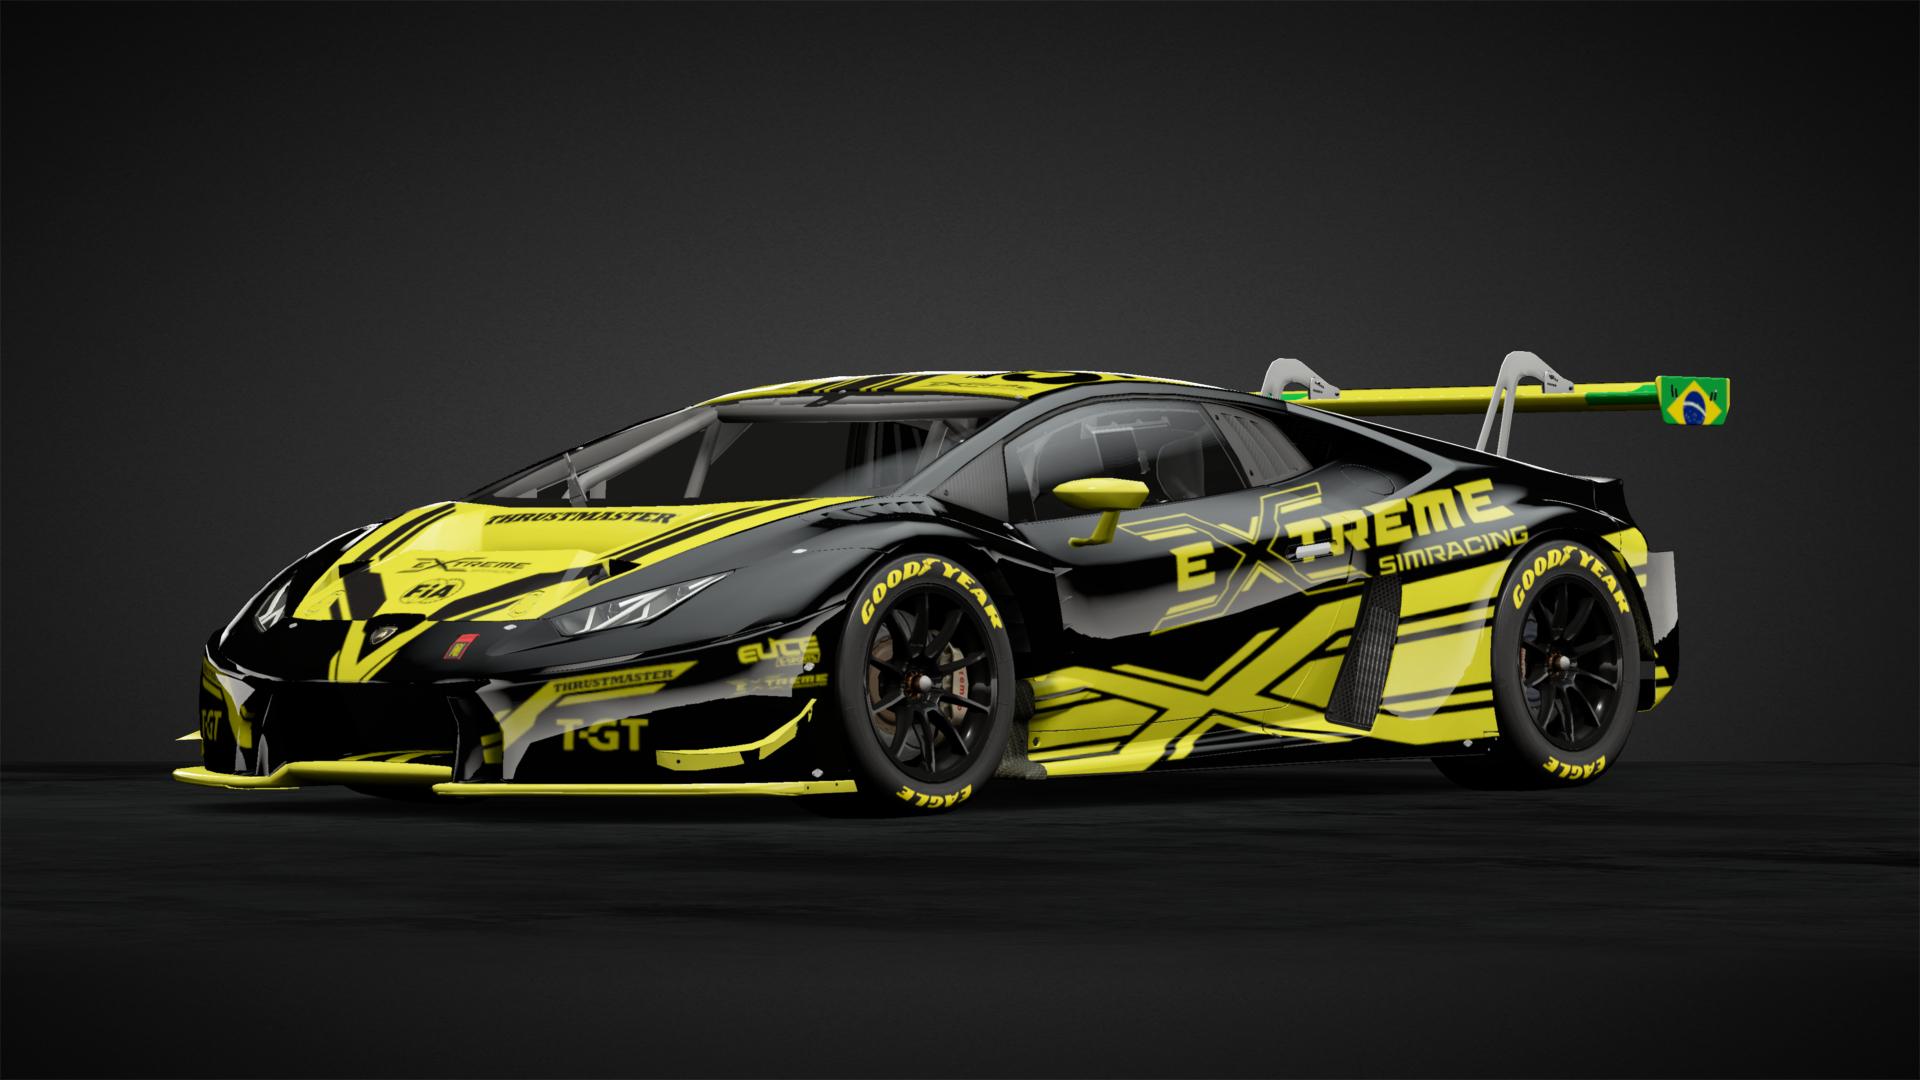 Service Client Leclerc Drive Beau Extreme Skin Elite Didico Car Livery by Loja Extreme